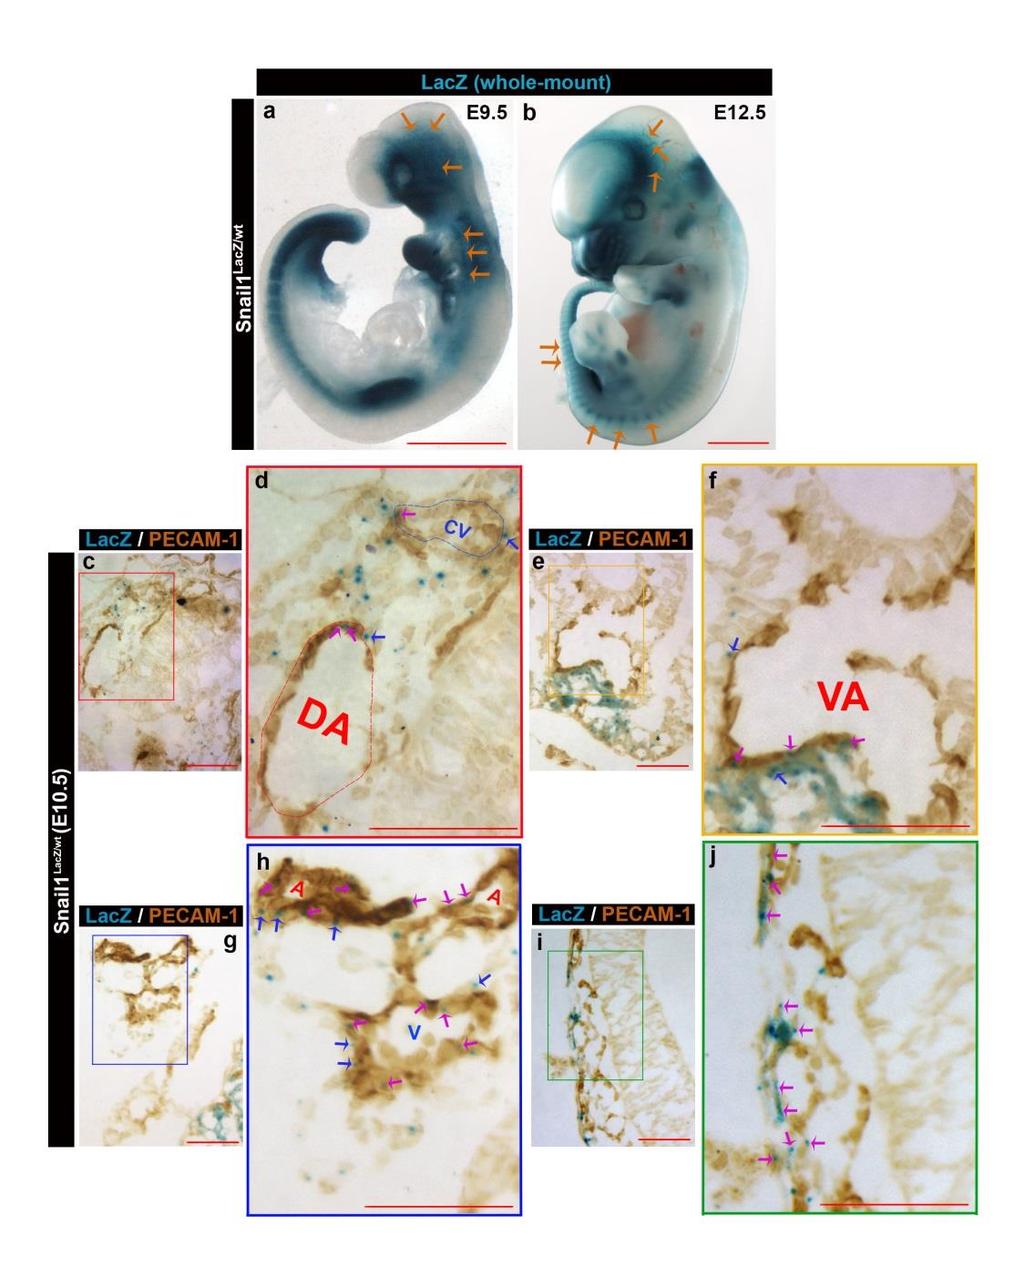 Supplementary Figure 2. Snail1 Is Expressed in Arterial and Venous Beds During Embryonic Development (a,b) Whole-mount X-gal/lacZ staining of embryo at E9.5 (a) and E12.5 (b), respectively.